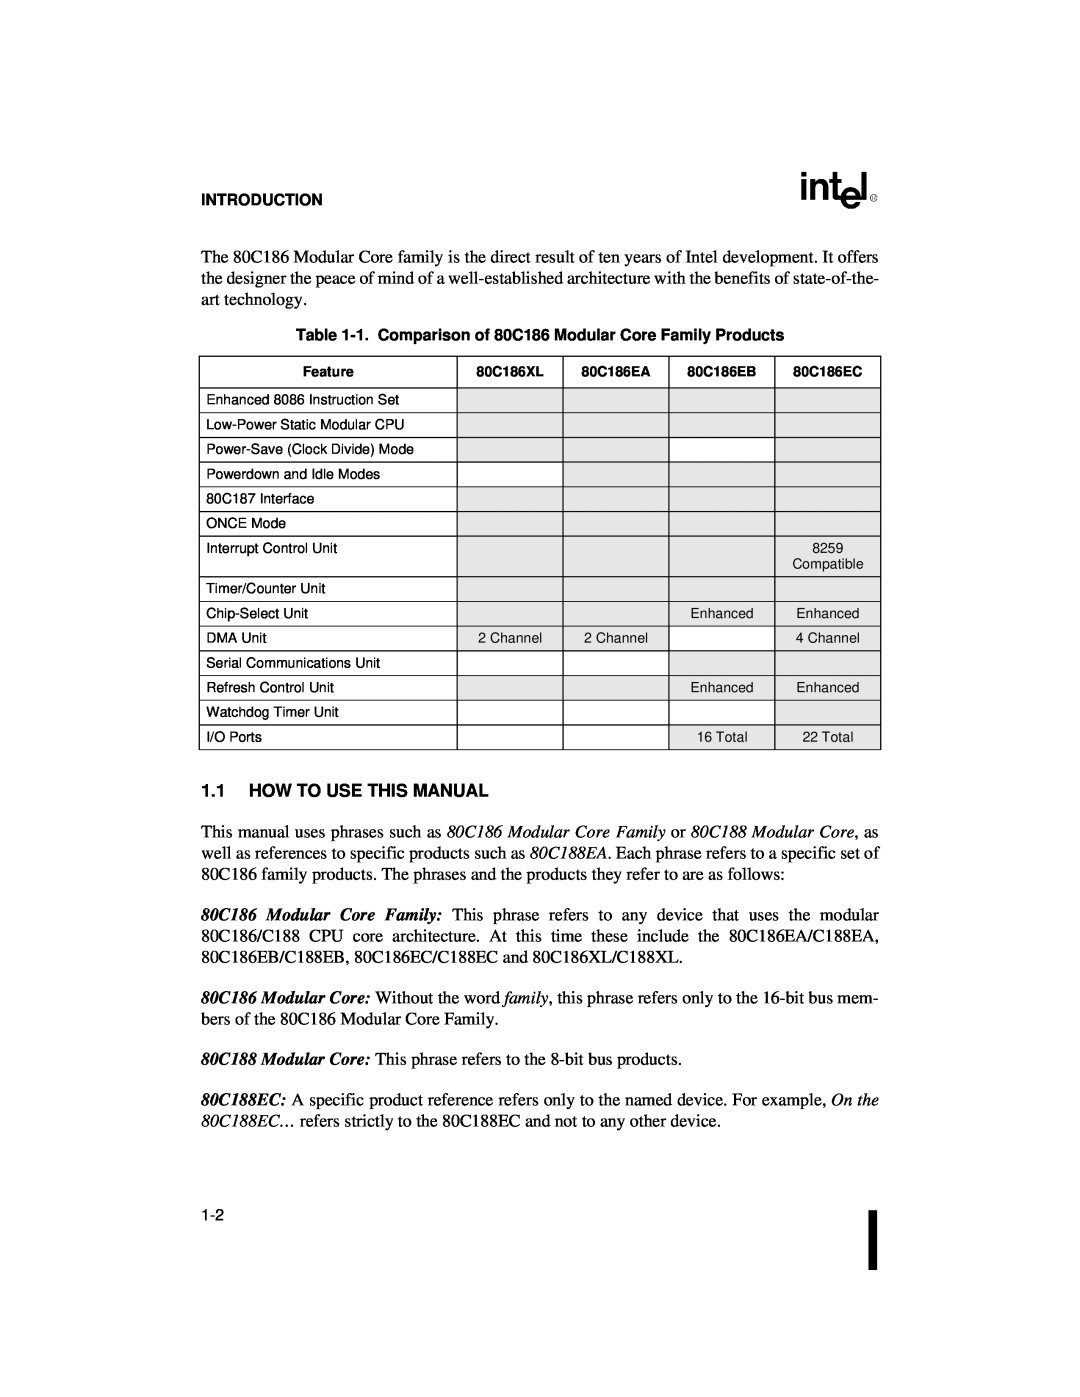 Intel 80C186XL, 80C188XL user manual 1.1HOW TO USE THIS MANUAL, Introduction 